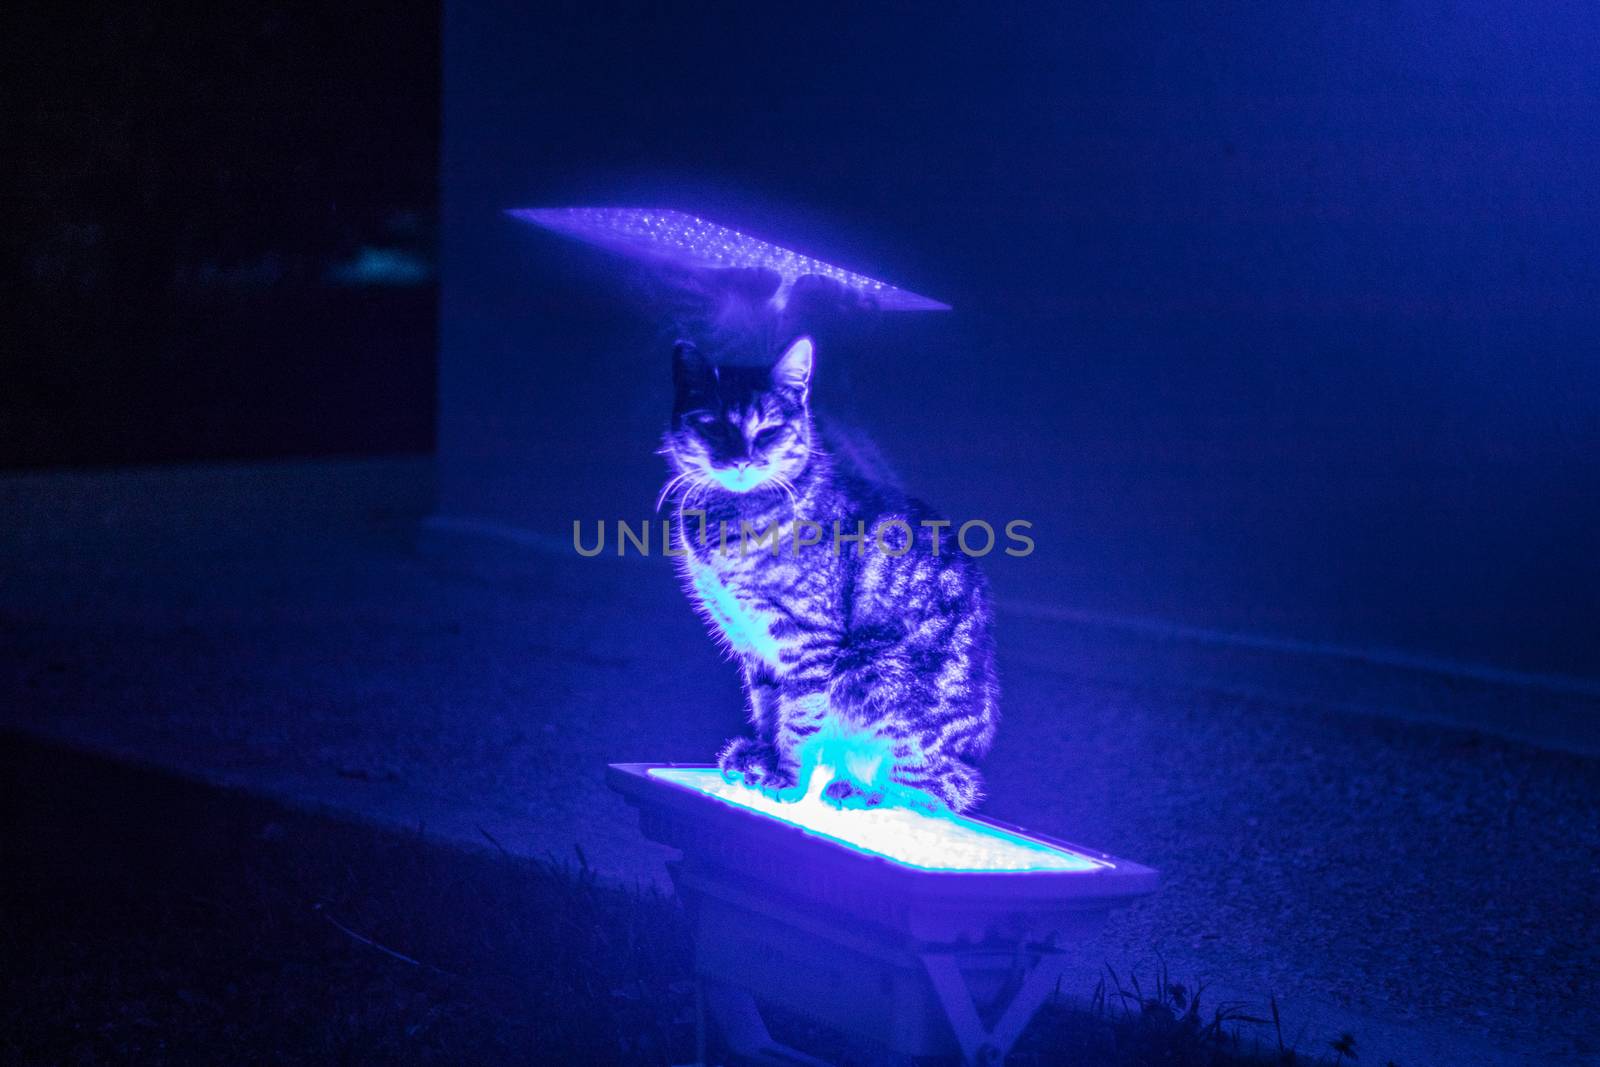 a cute cat sitting on blue neon lights. cat got angry eyes.